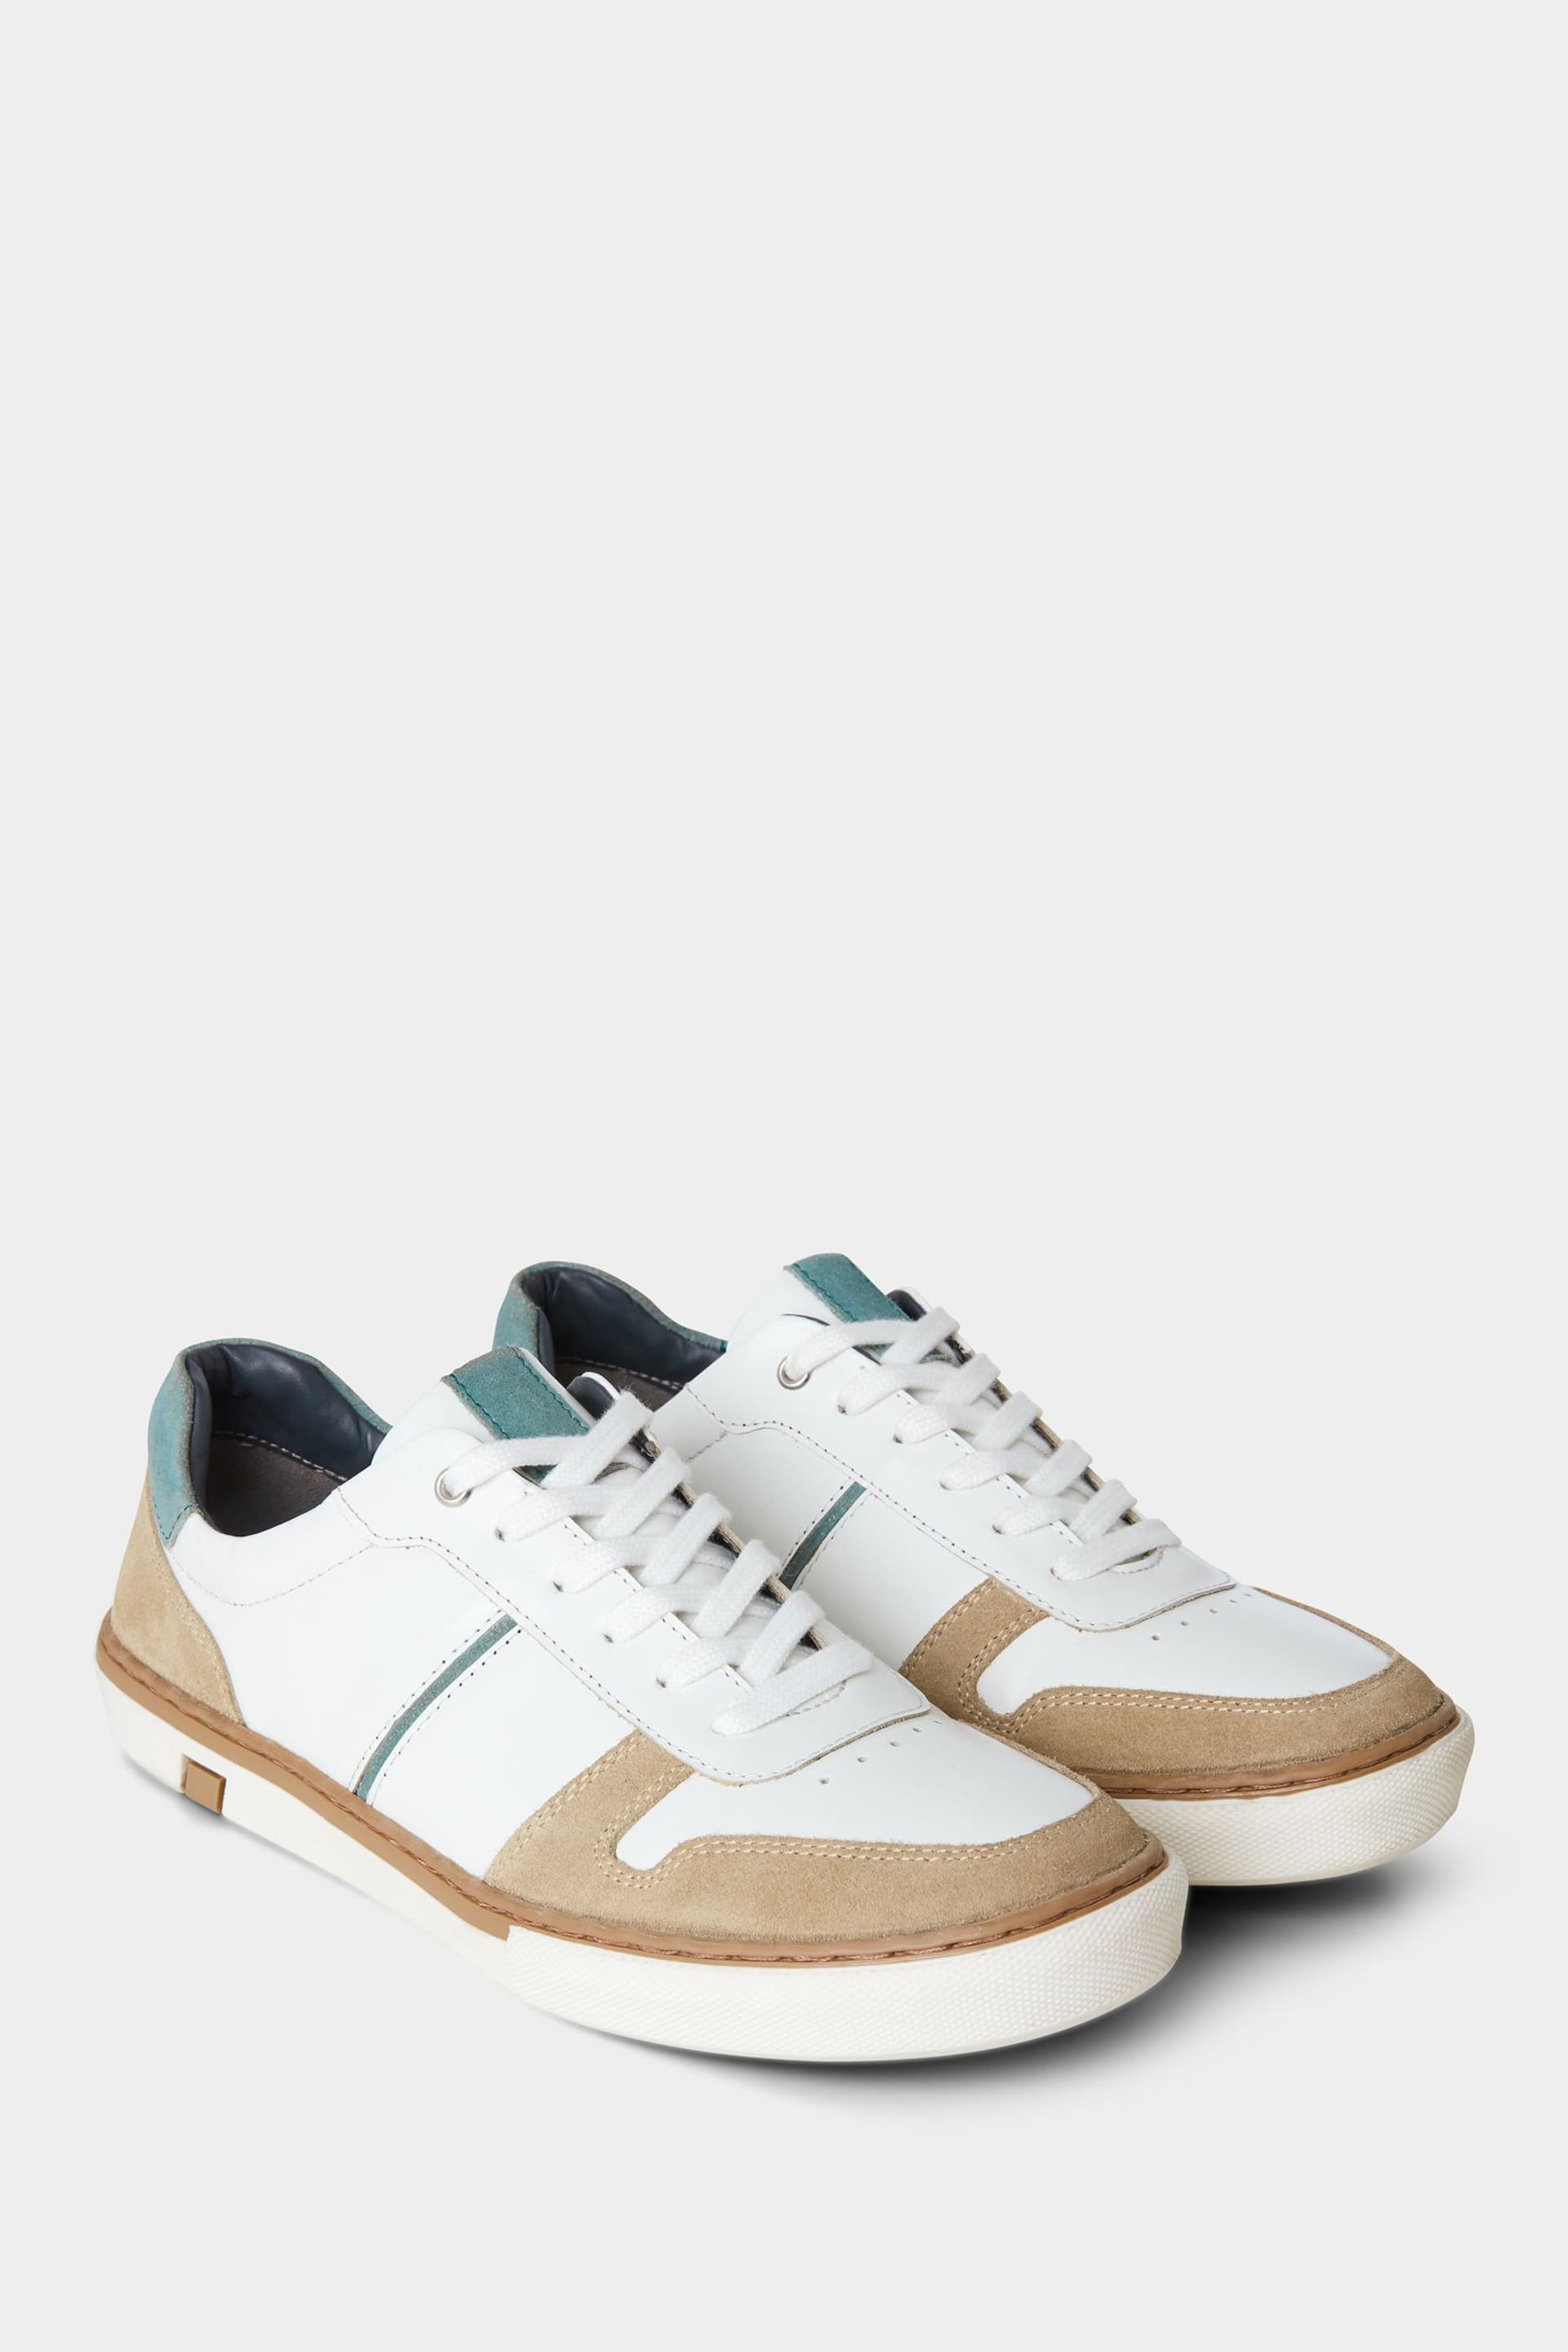 Joe Browns White Classic Leather Trainers - Image 1 of 5